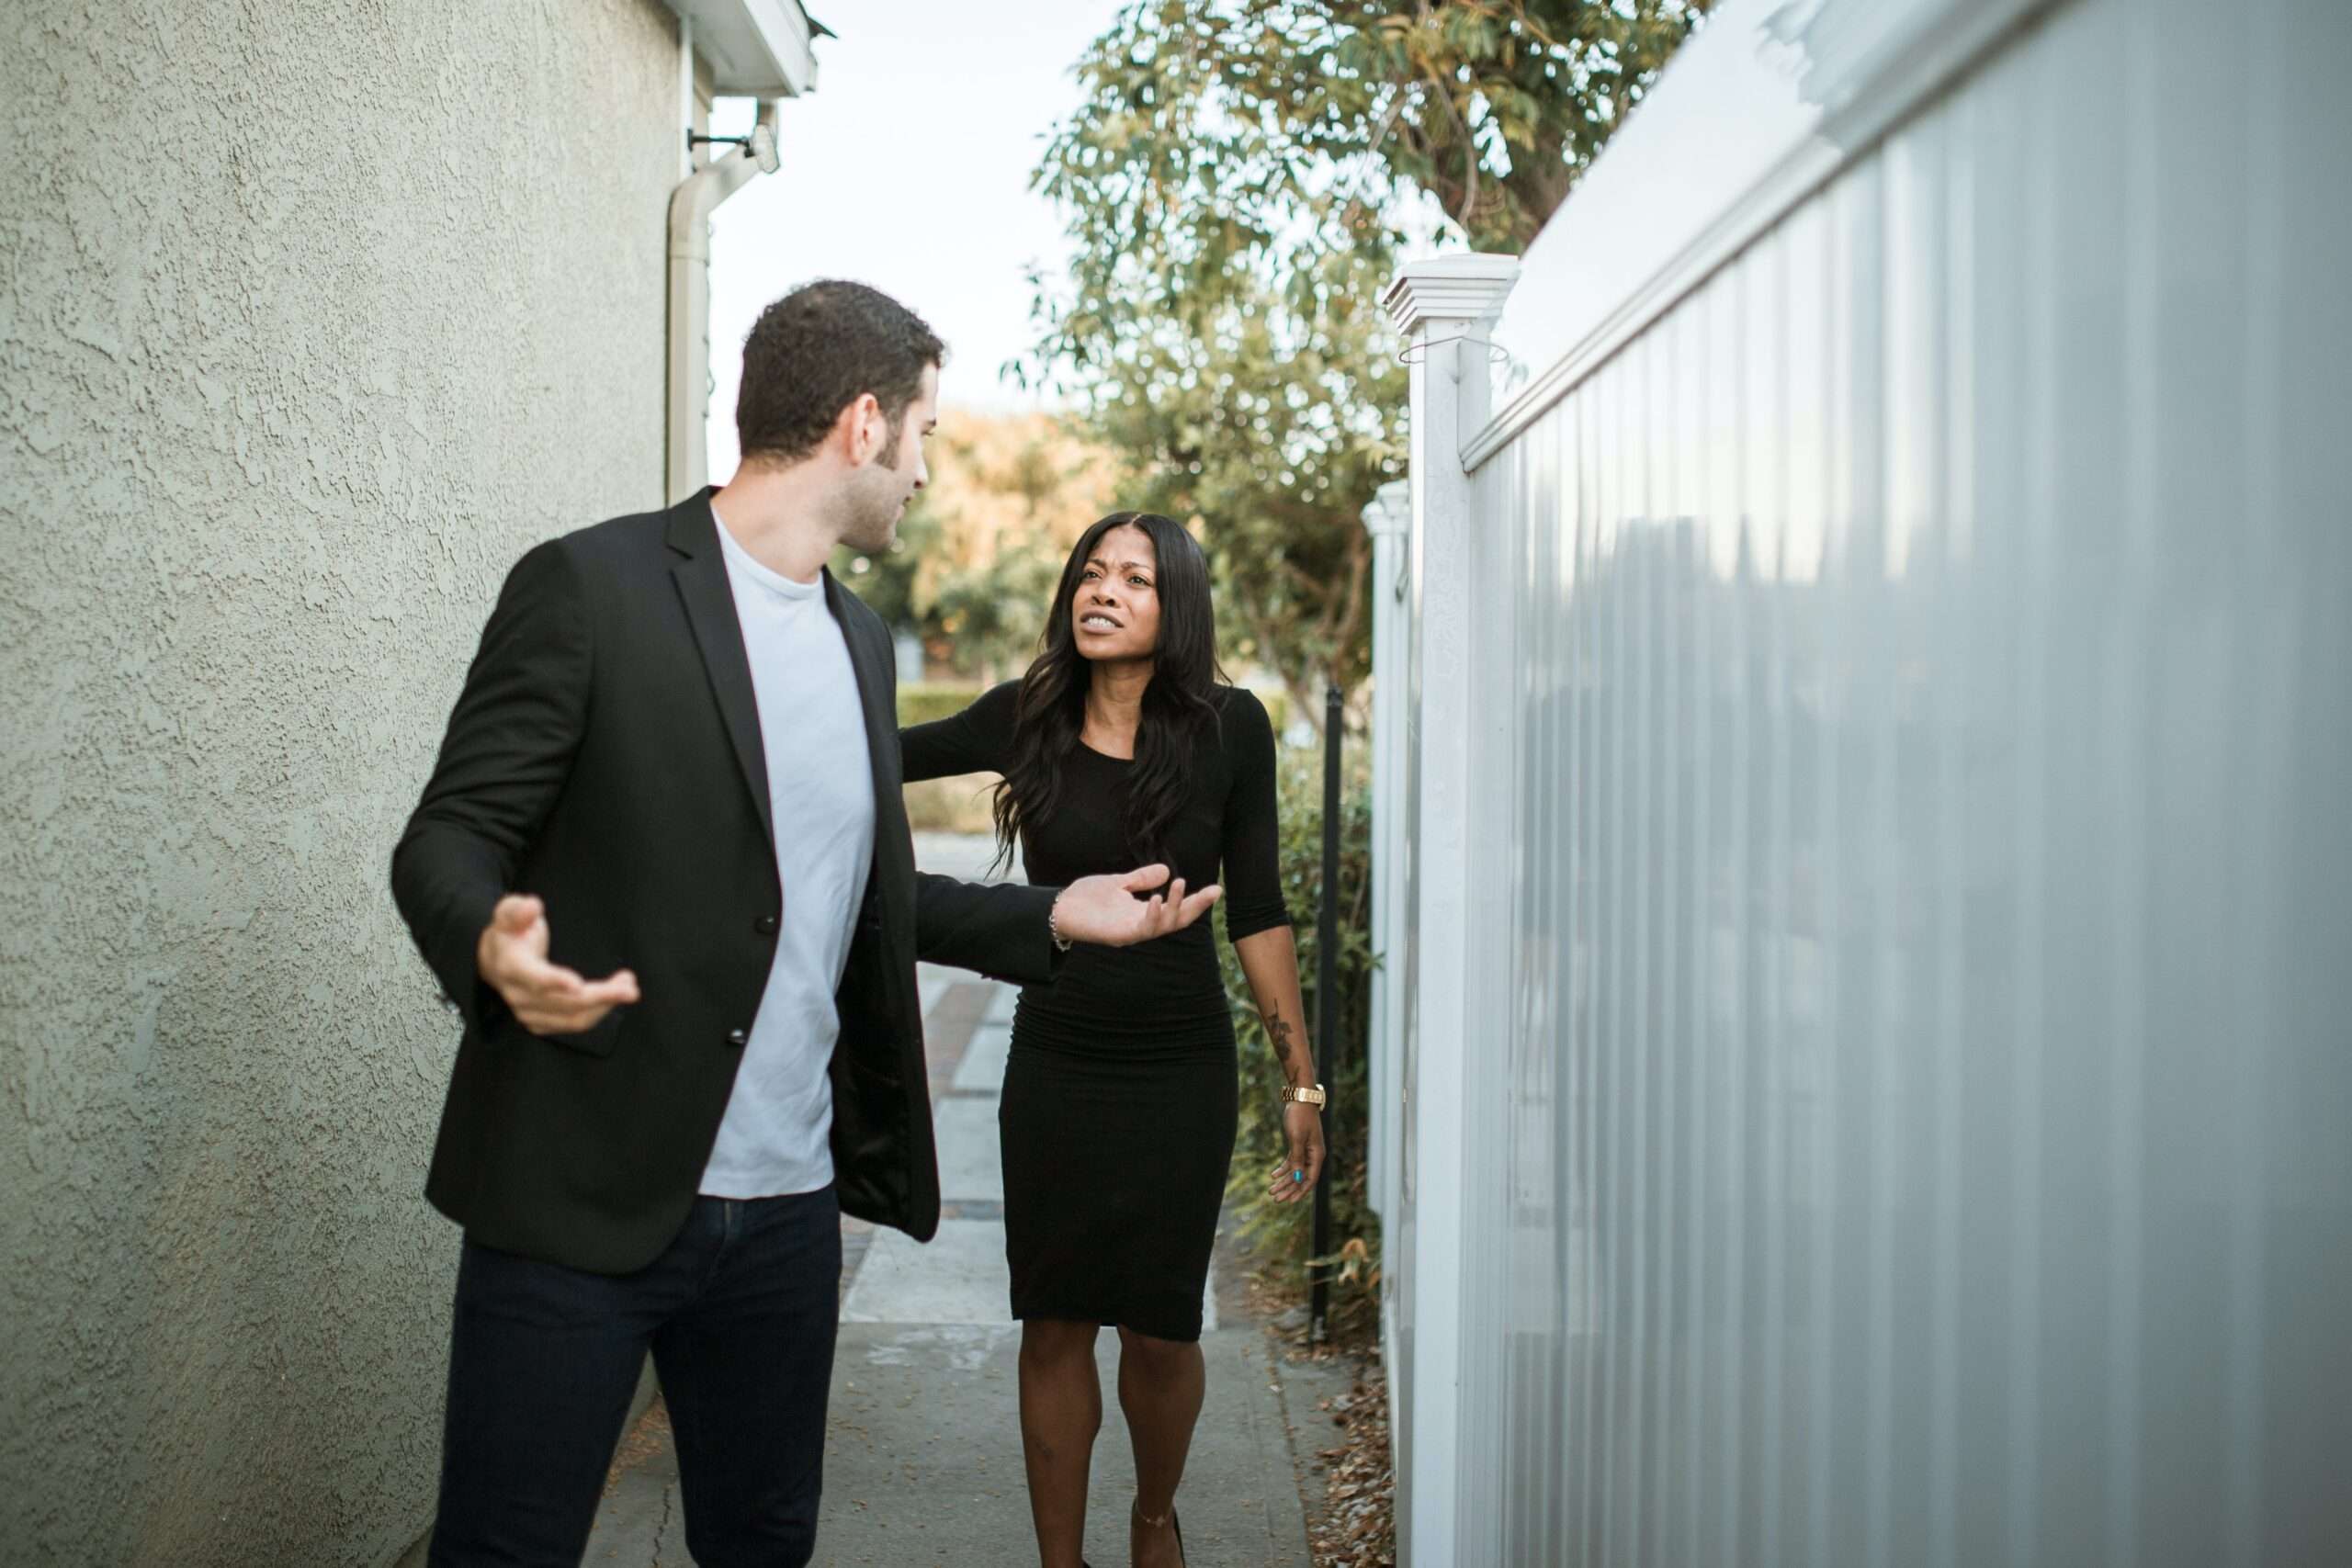 A man and a woman in a heated discussion outdoors, exemplifying a double standard in communication and emotional expression.